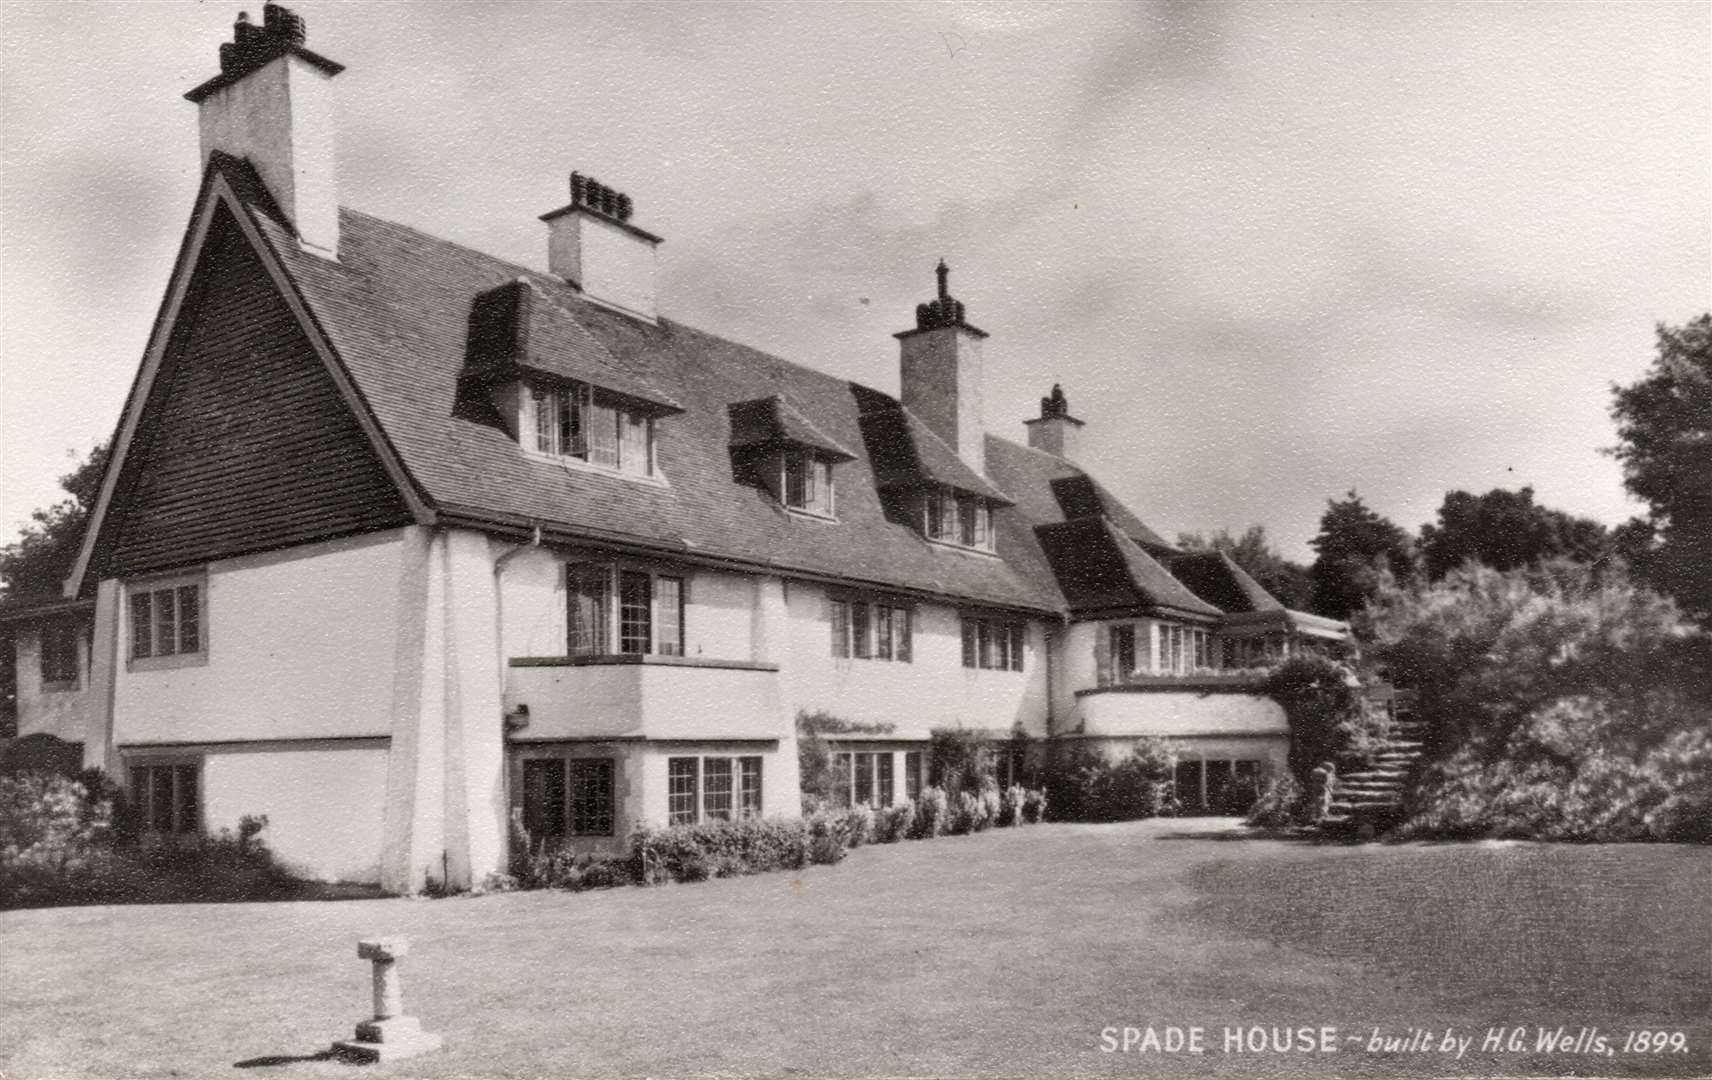 Spade House, the house built for HG Wells and his family. Picture courtesy of Alan Taylor